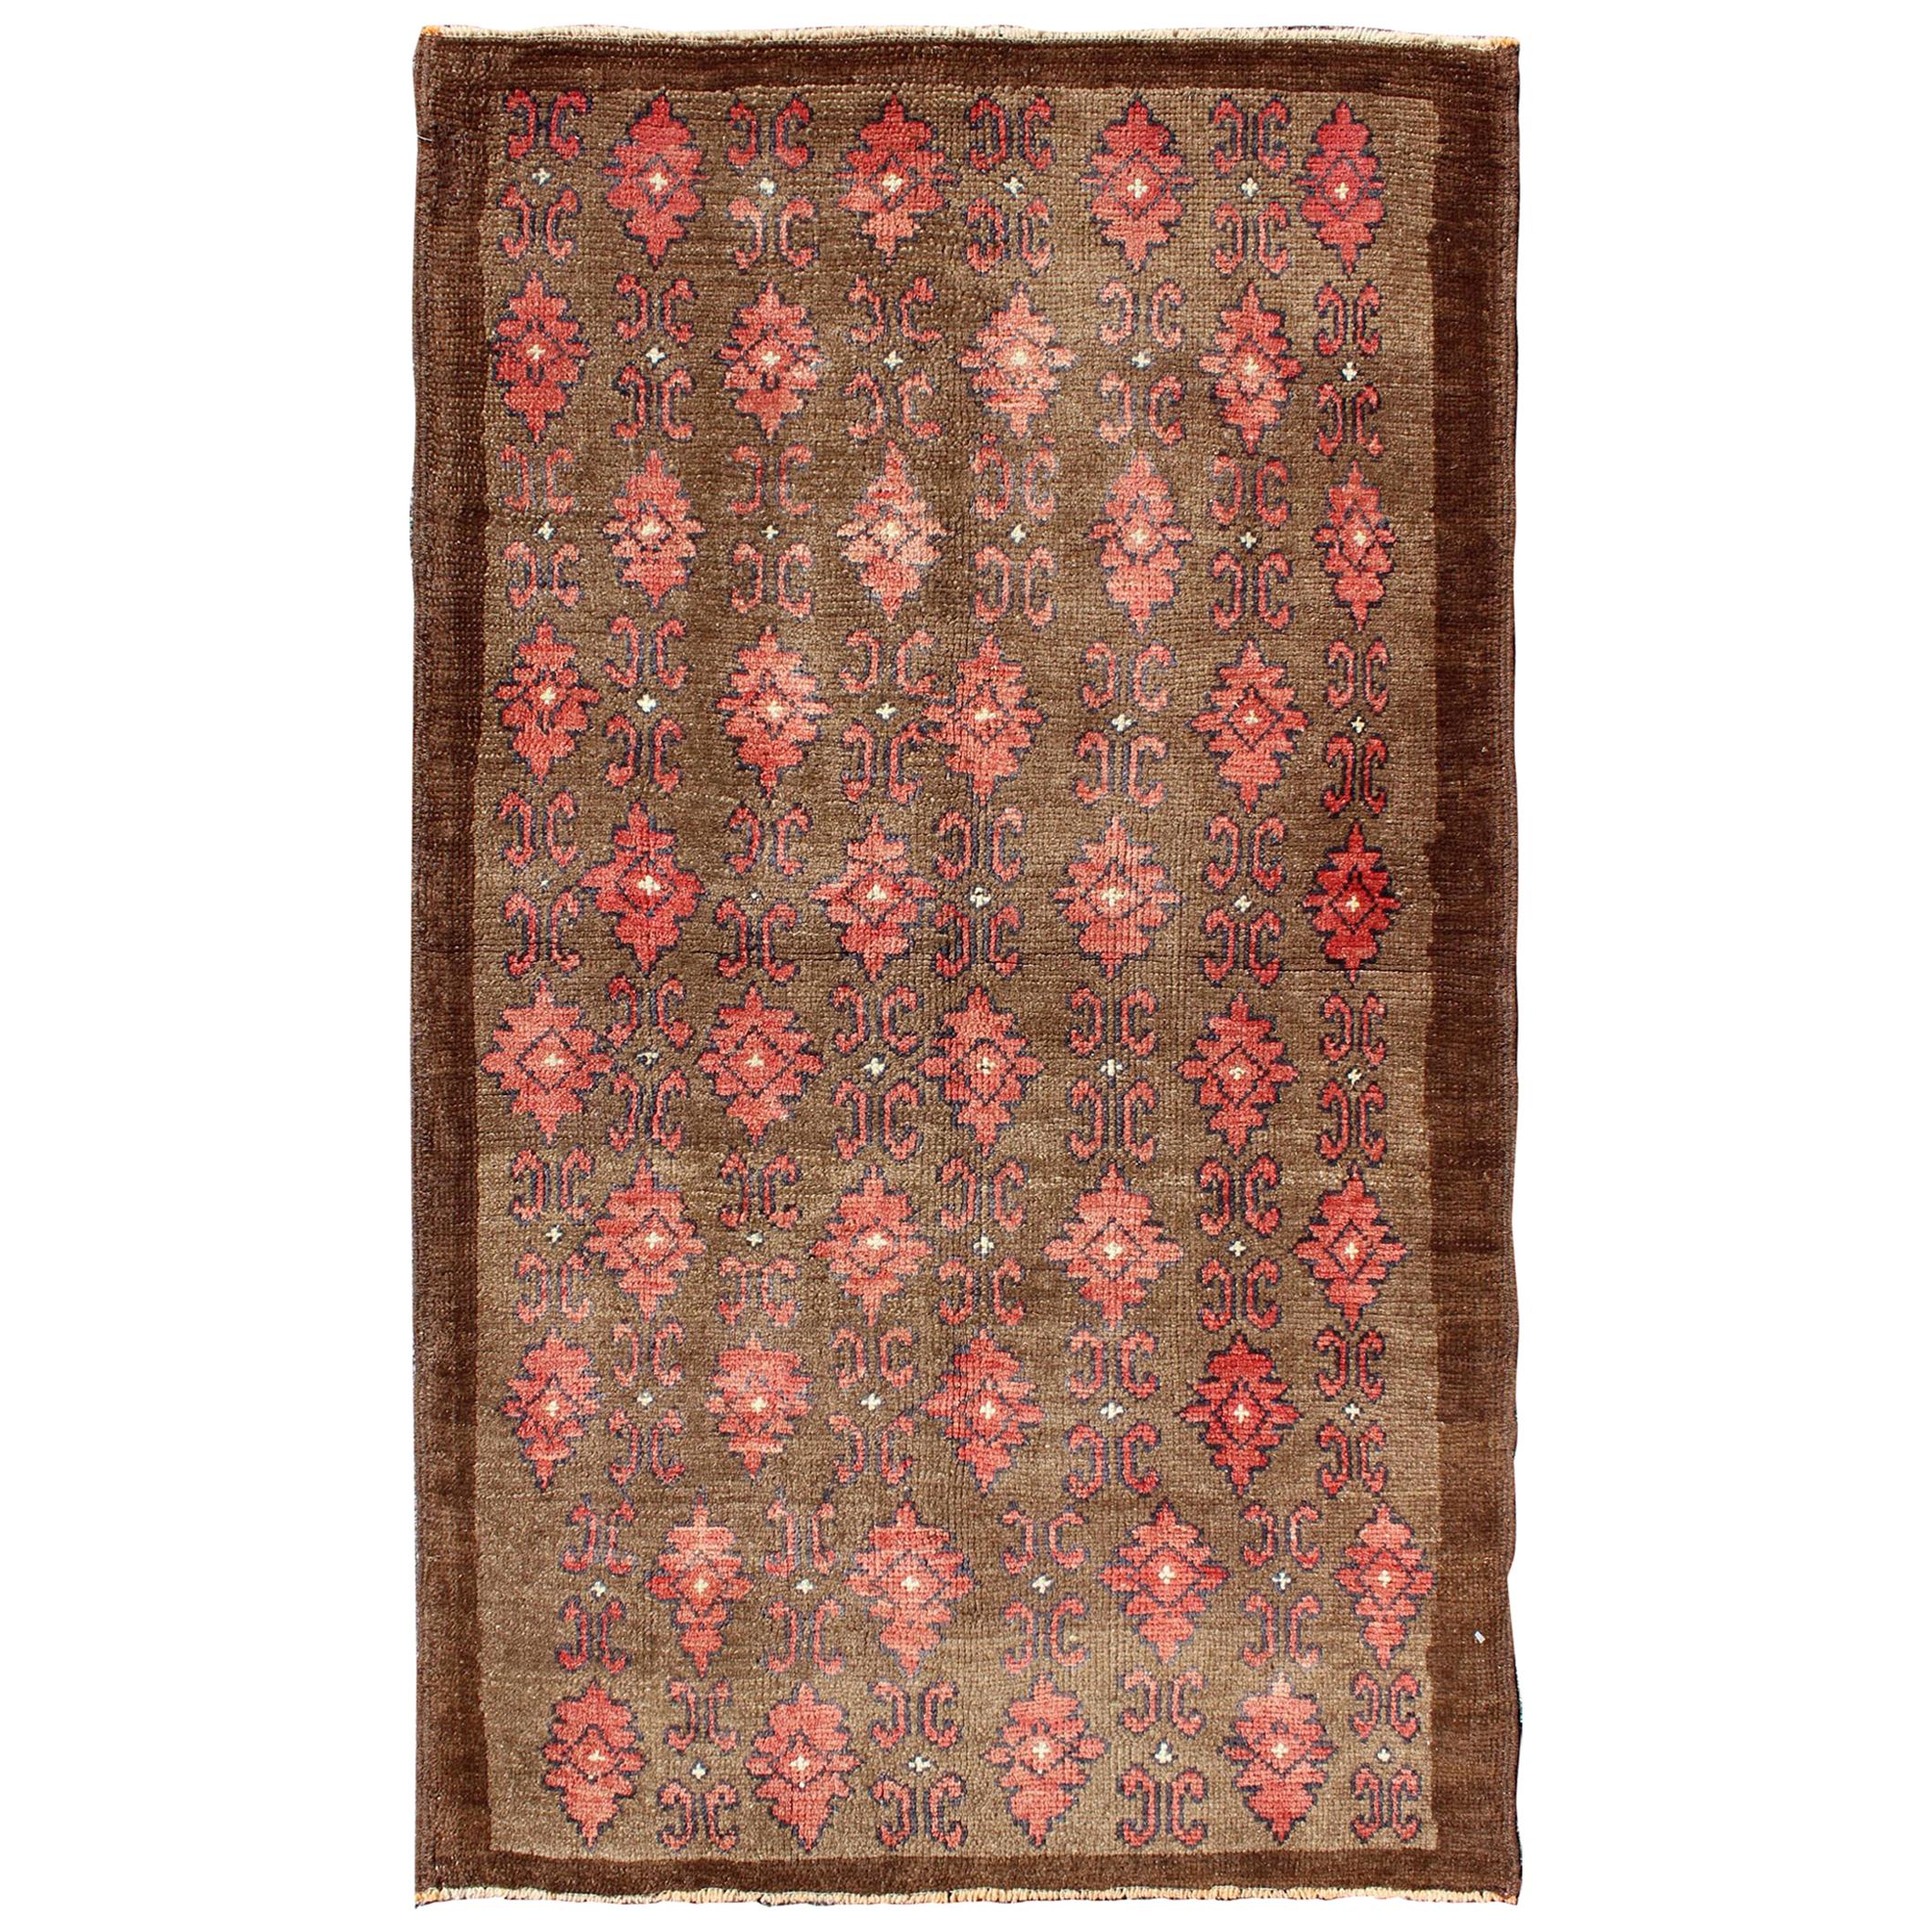 Red and Brown Vintage Turkish Oushak Rug with Repeating Vertical Motif Design